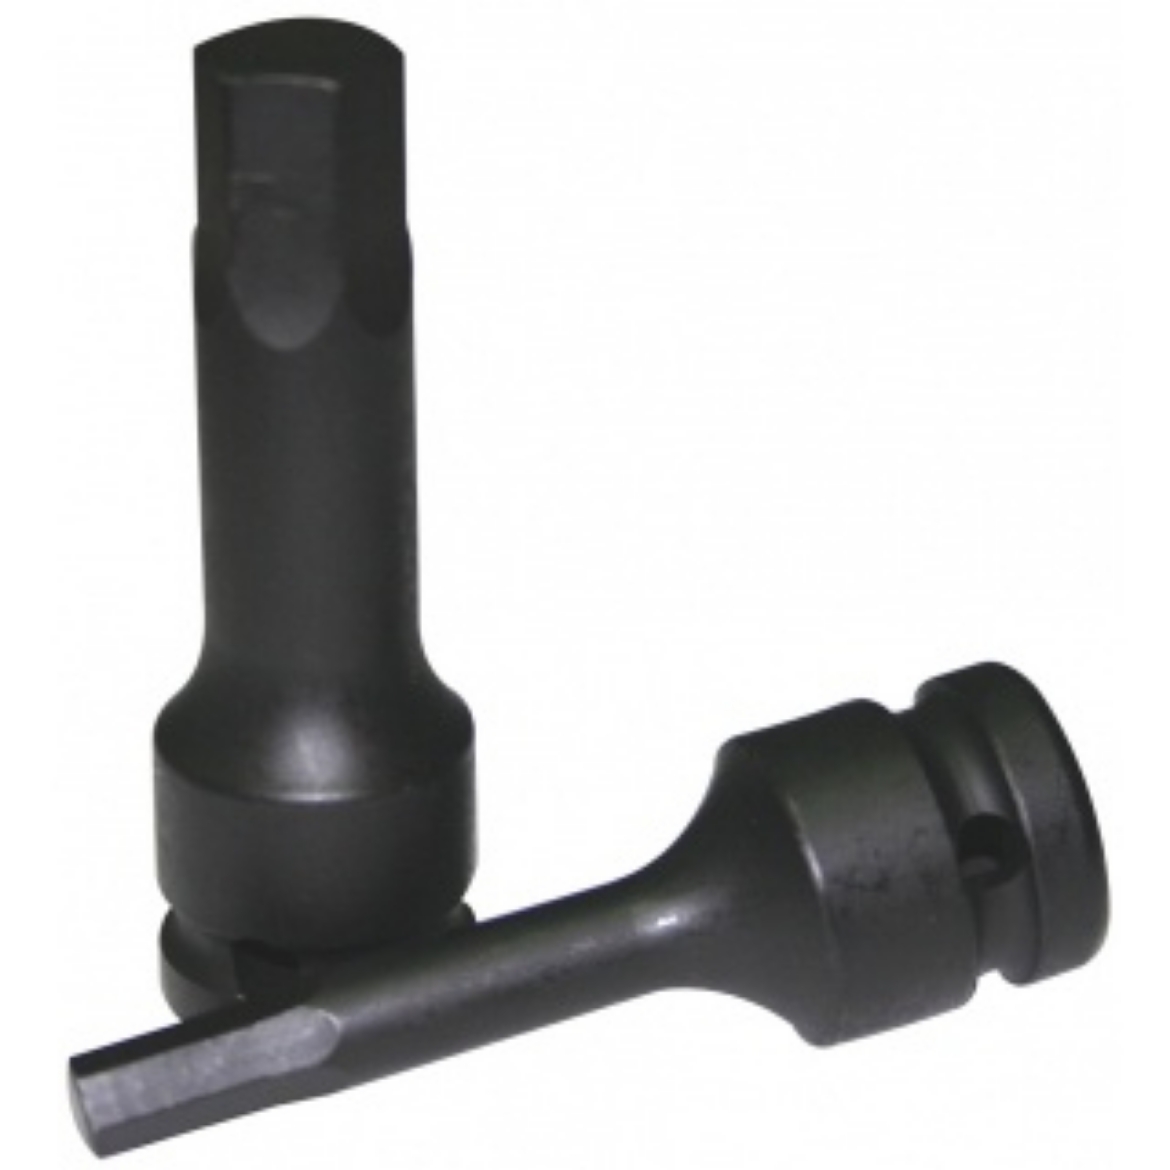 Picture of SOCKET IMPACT 1/2"DR INHEX METRIC 14MM SP TOOLS